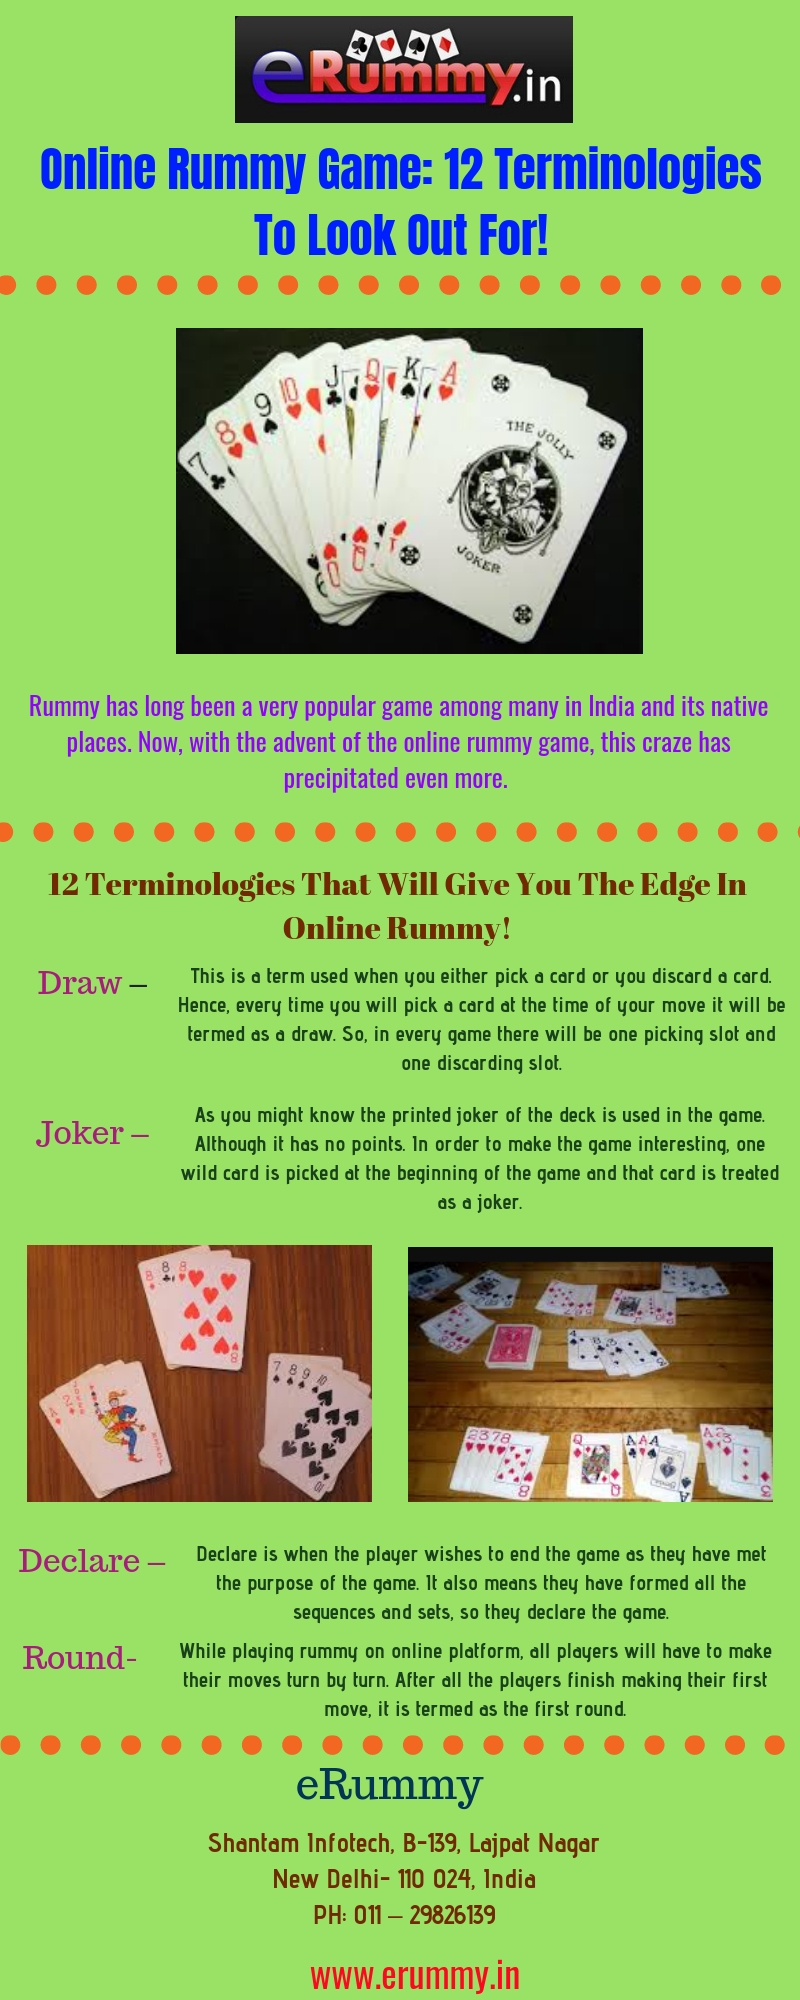 Online rummy game-12 terminologies to look out for!.jpg Becoming proficient in rummy game online you need to be well-versed with its jargons. This post will help you exactly with that.For more details, visit: https://bit.ly/2LqUXpG
 by Erummy